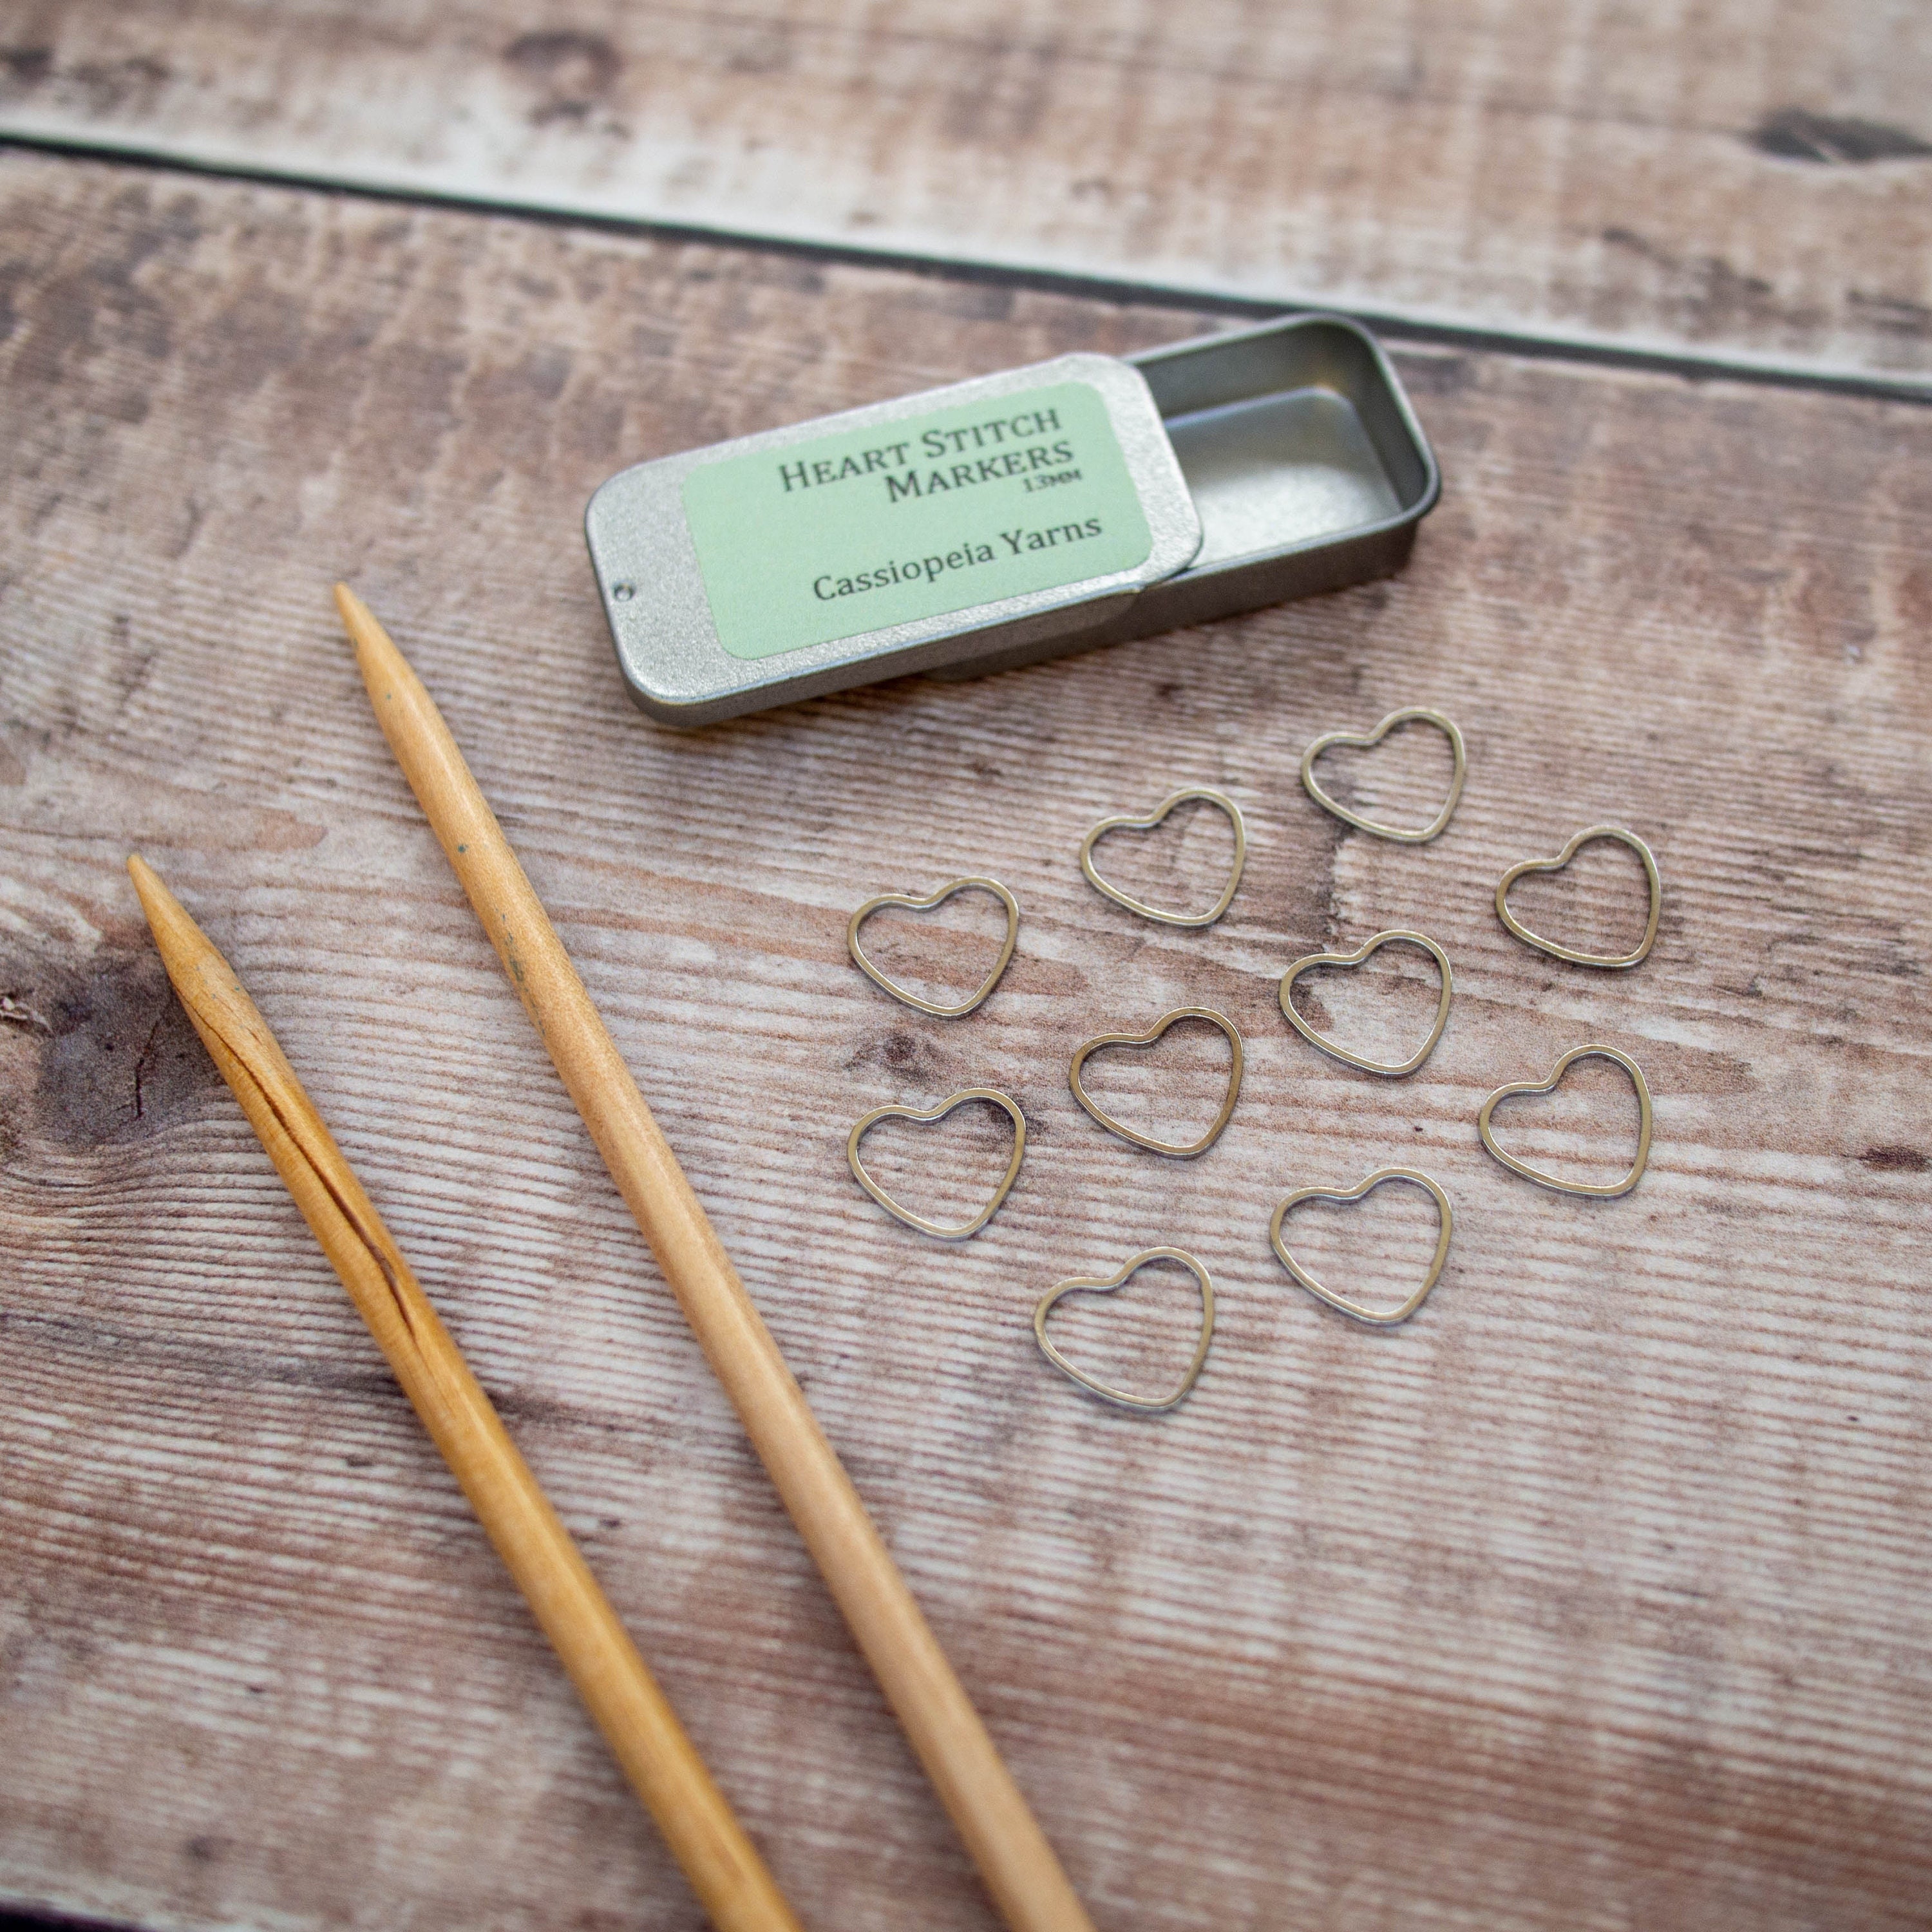 Snag Free Stitch Markers for Knitting, Knitting Notions, Heart